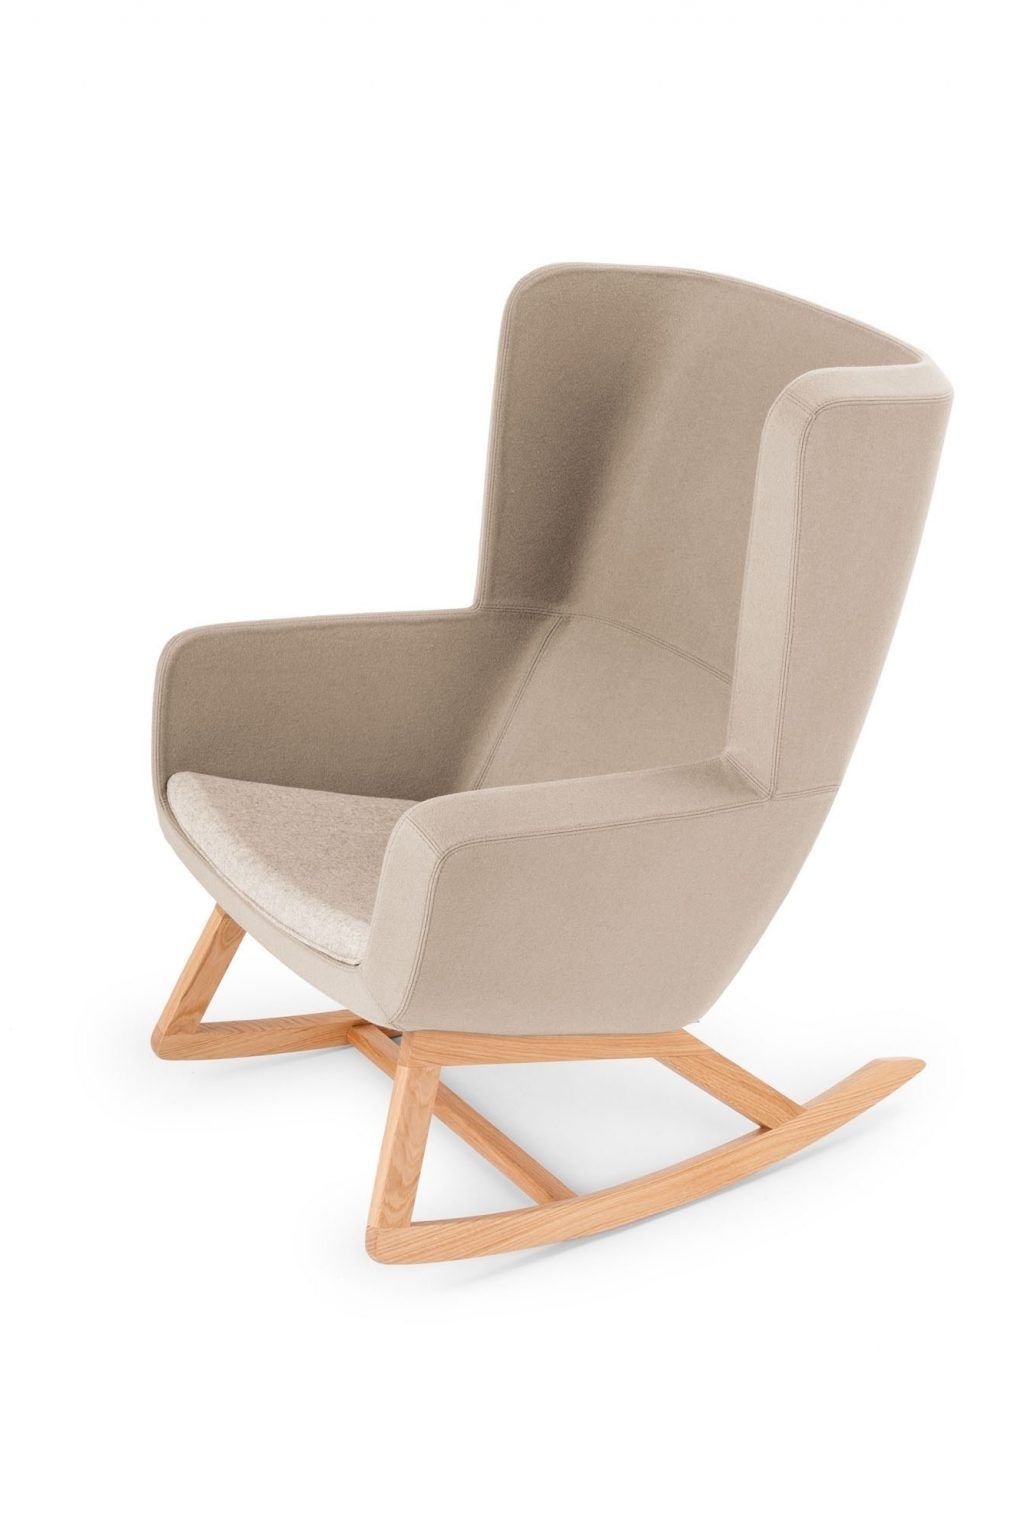 2019 Unbelievable Beautiful Rocking Armchair Picture Nz Ireland Ikea With Ireland Rocking Chairs (View 8 of 20)